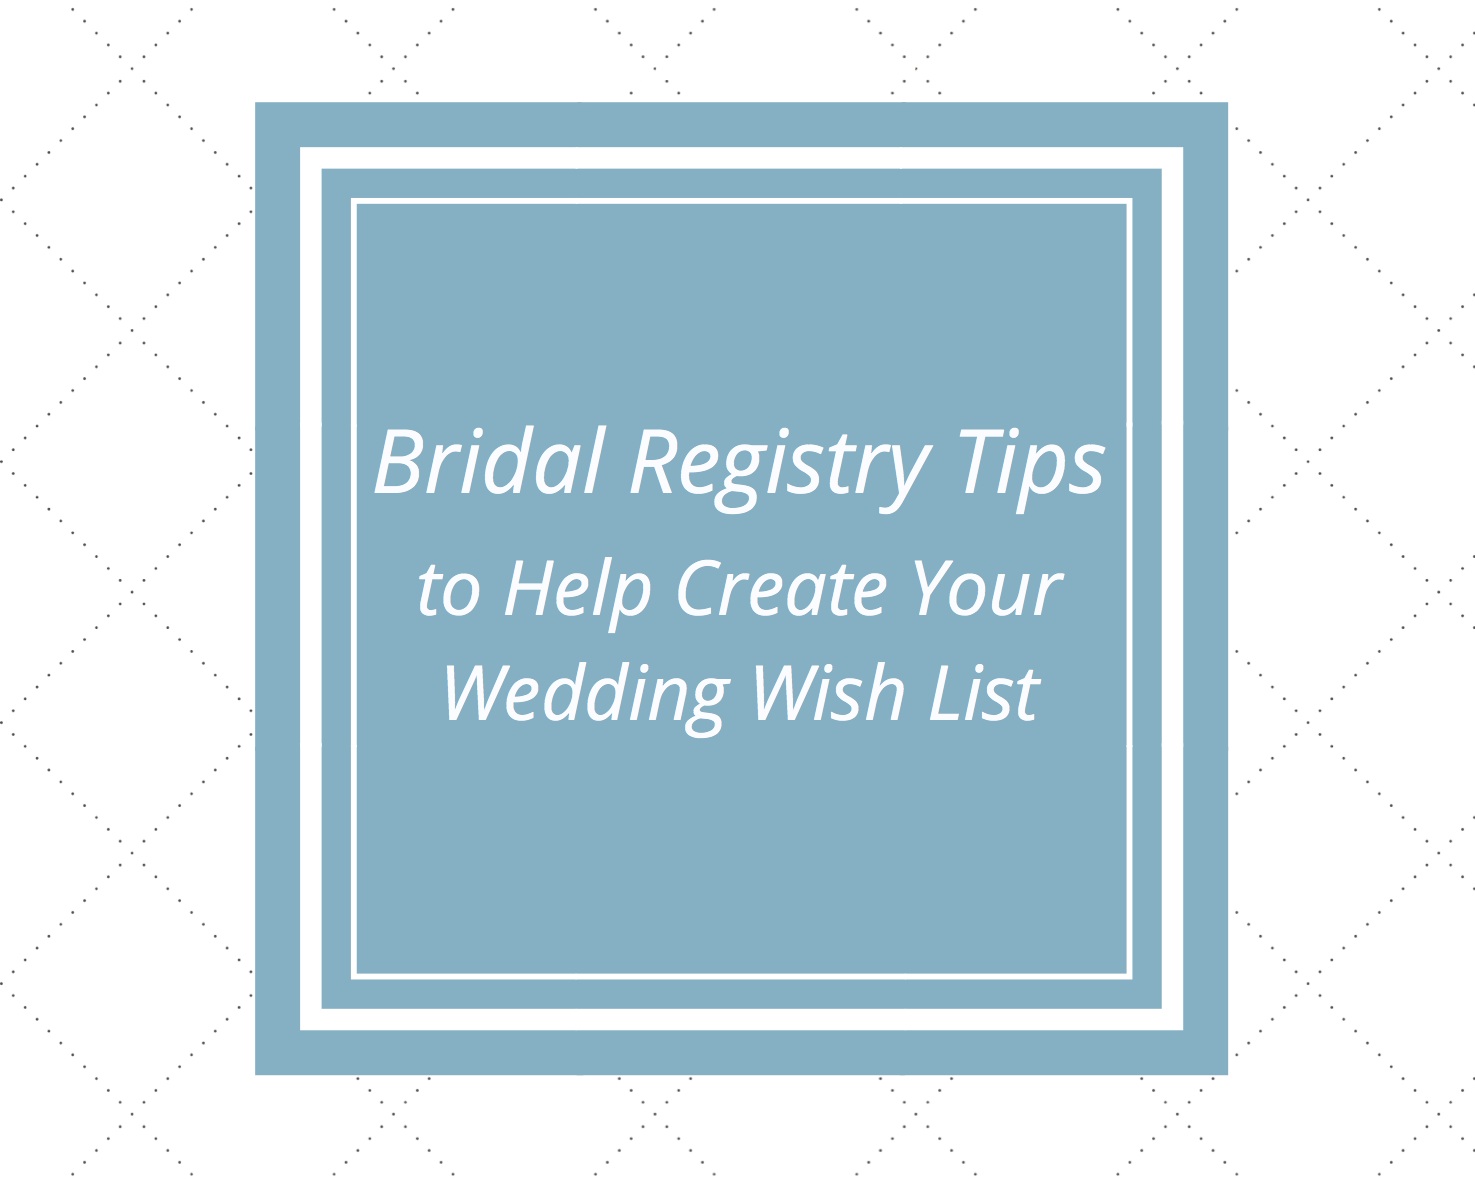 Bridal Registry Tips to Help Create Your Wedding Wish List